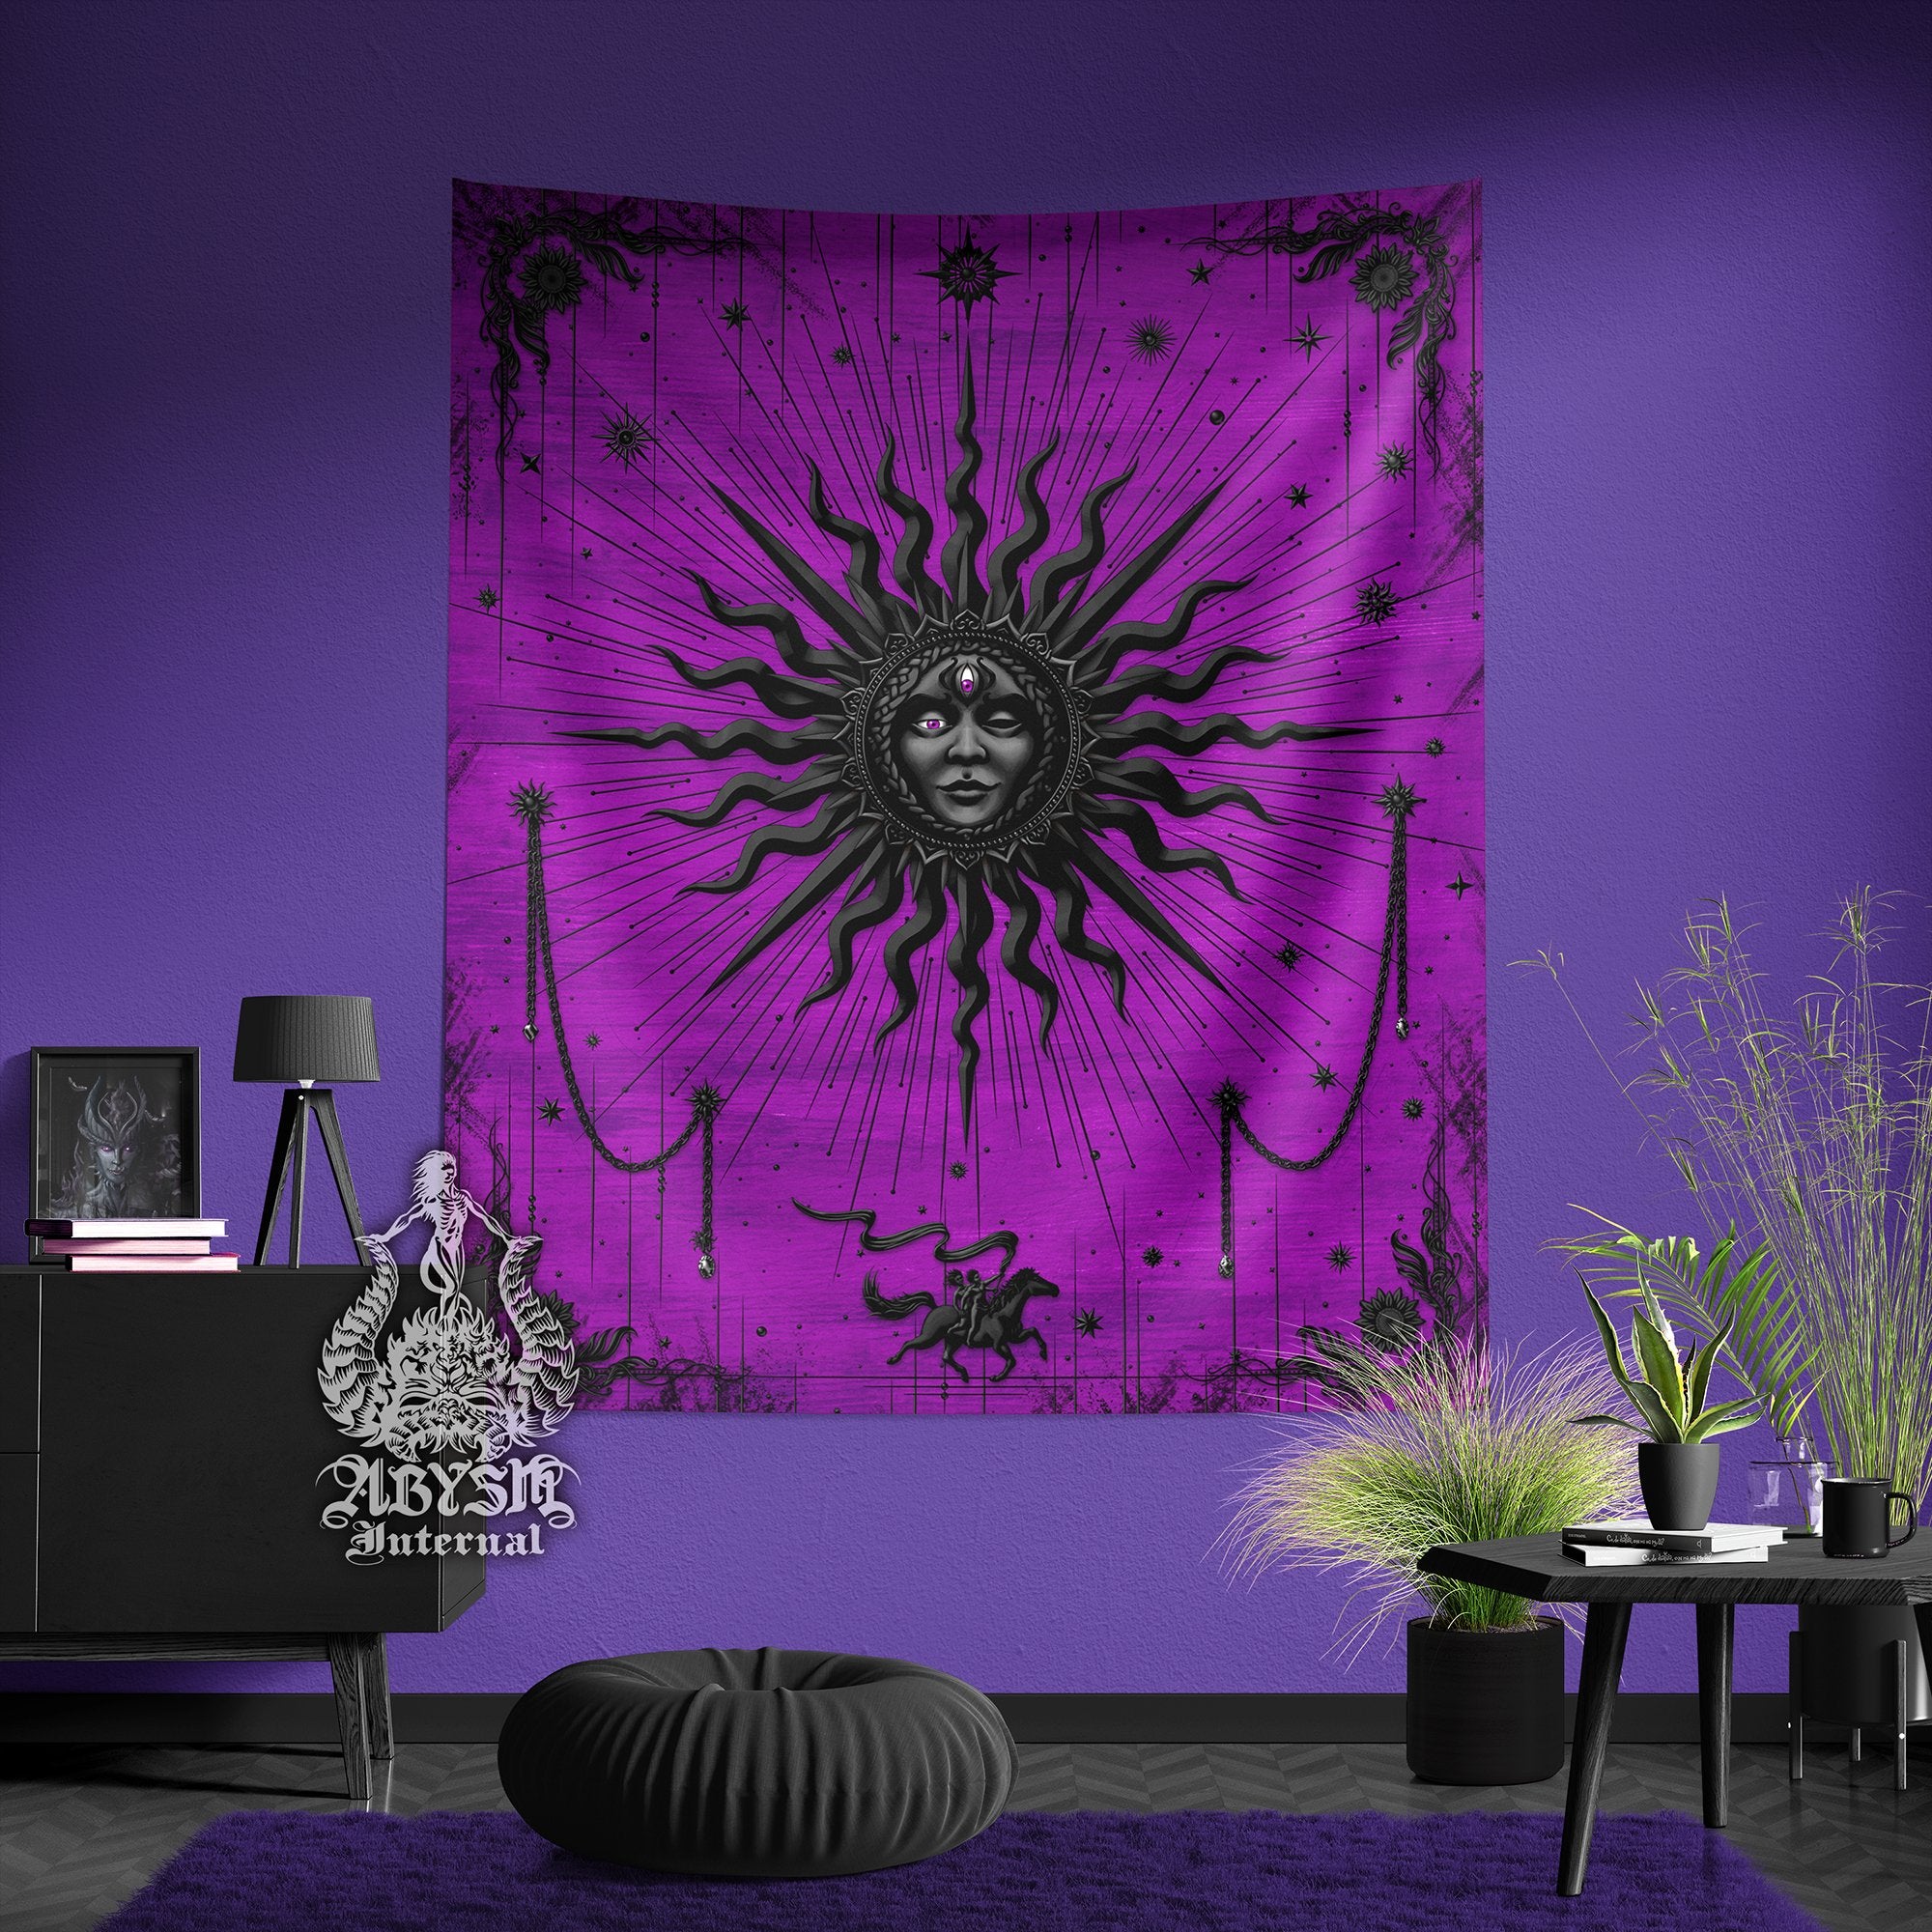 Witchy Sun Tapestry, Gothic Tarot Card Arcana Wall Hanging, Whimsical Witch's Room Decor, Pastel Goth Home, Magic and Esoteric Art, Vertical Print - Black Purple - Abysm Internal